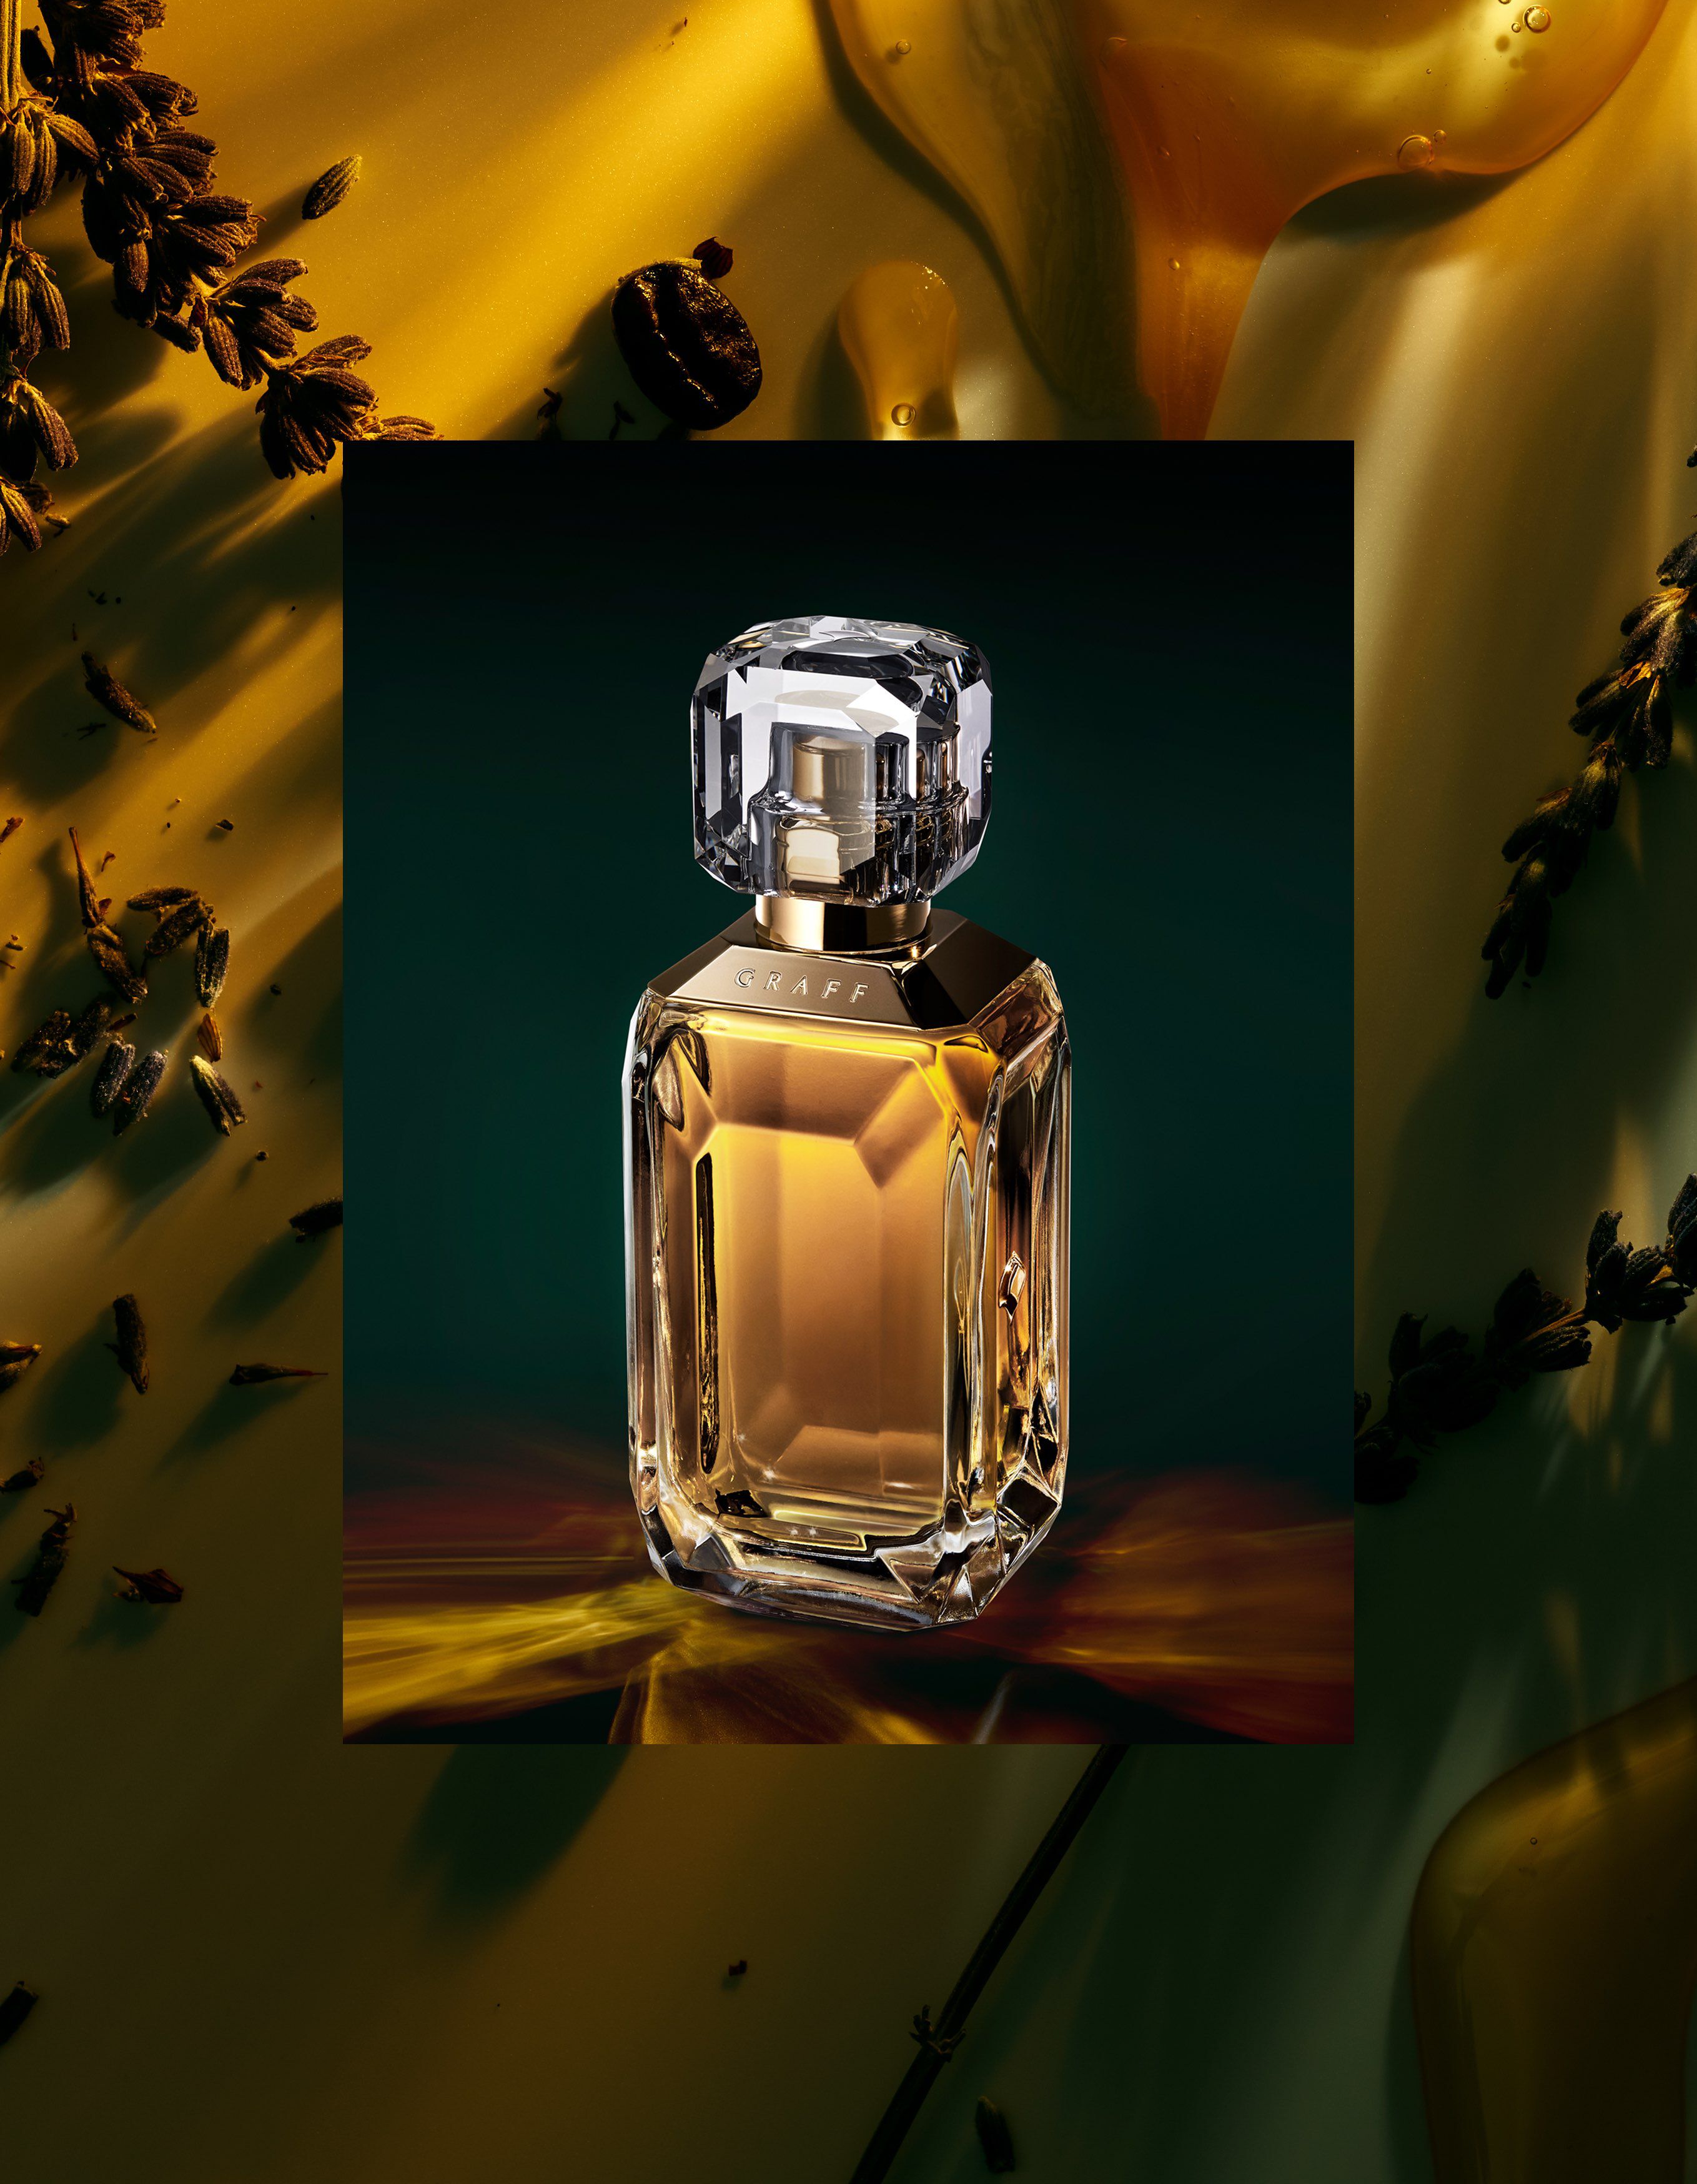 The Lesedi La Rona IV fragrance with ingredients by Graff